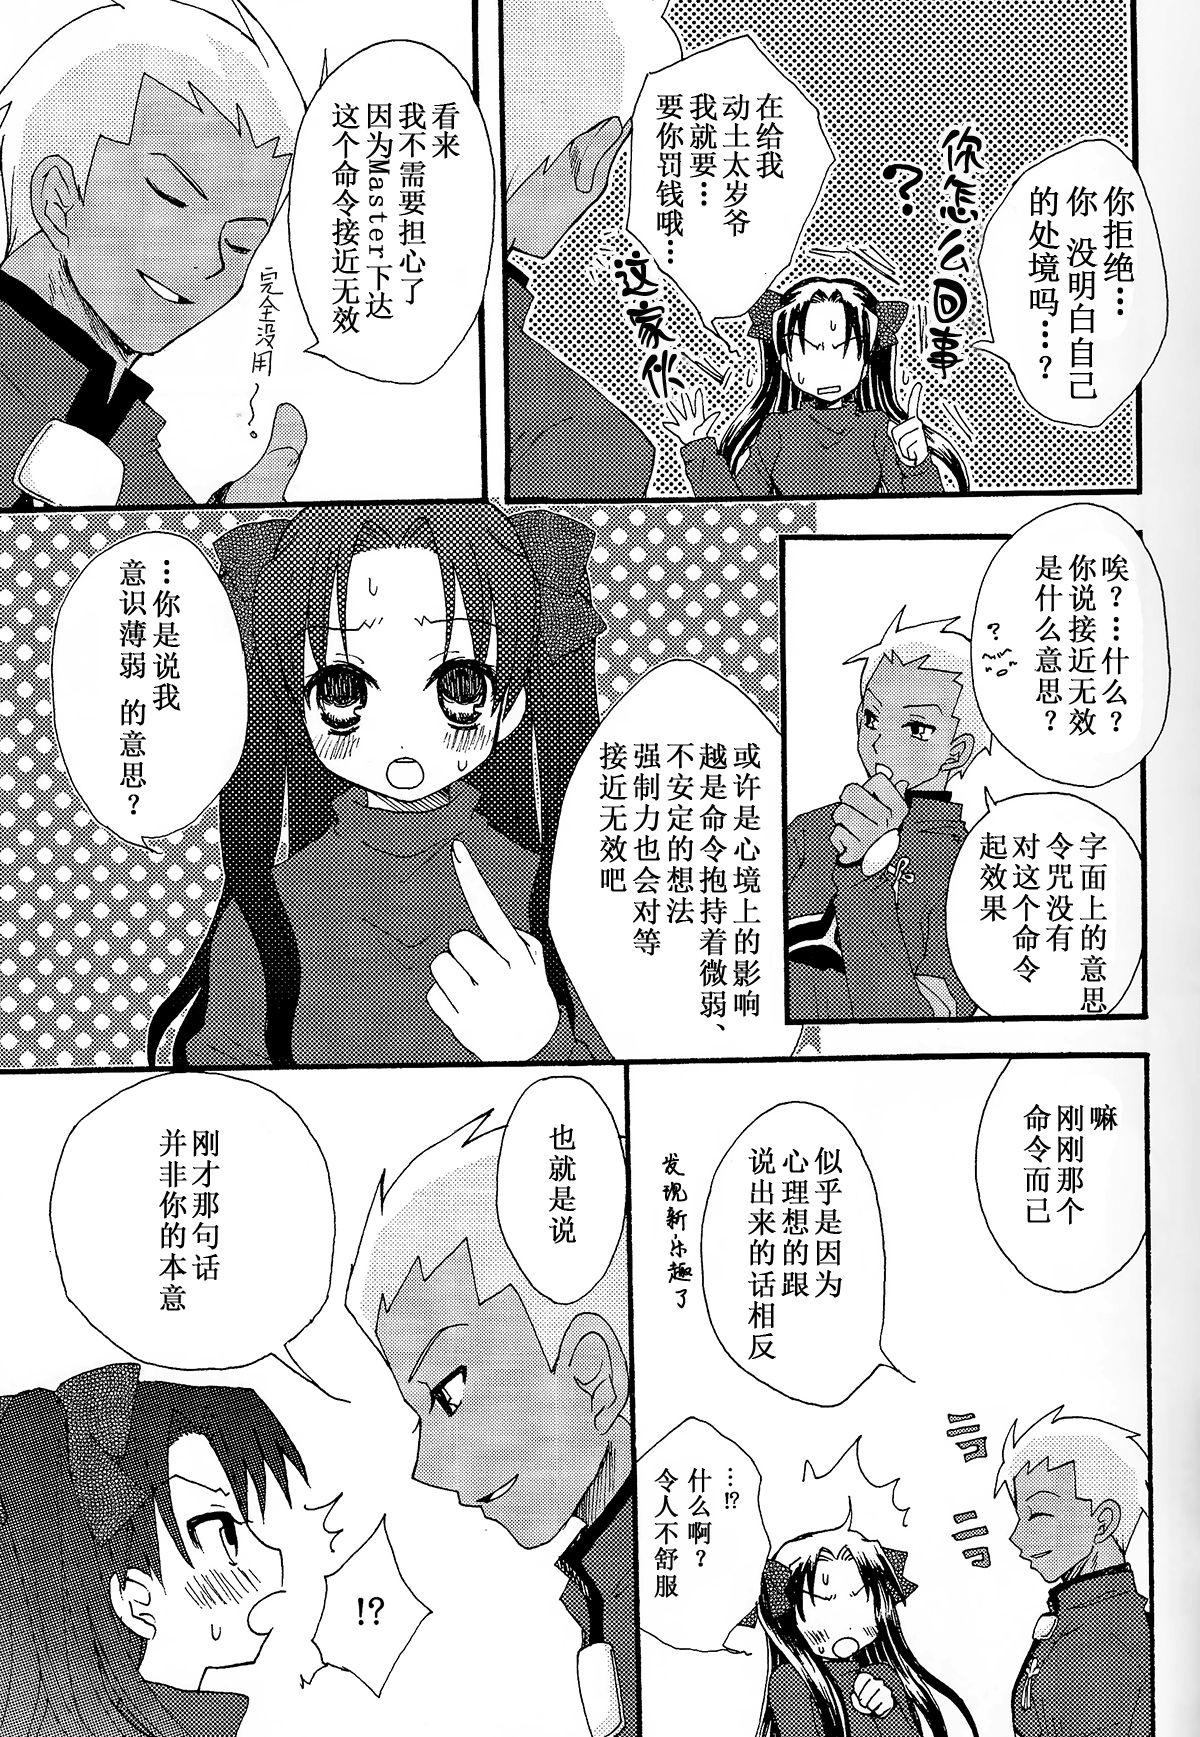 Jerking Kanojo to Aiken - Fate stay night Ballbusting - Page 6